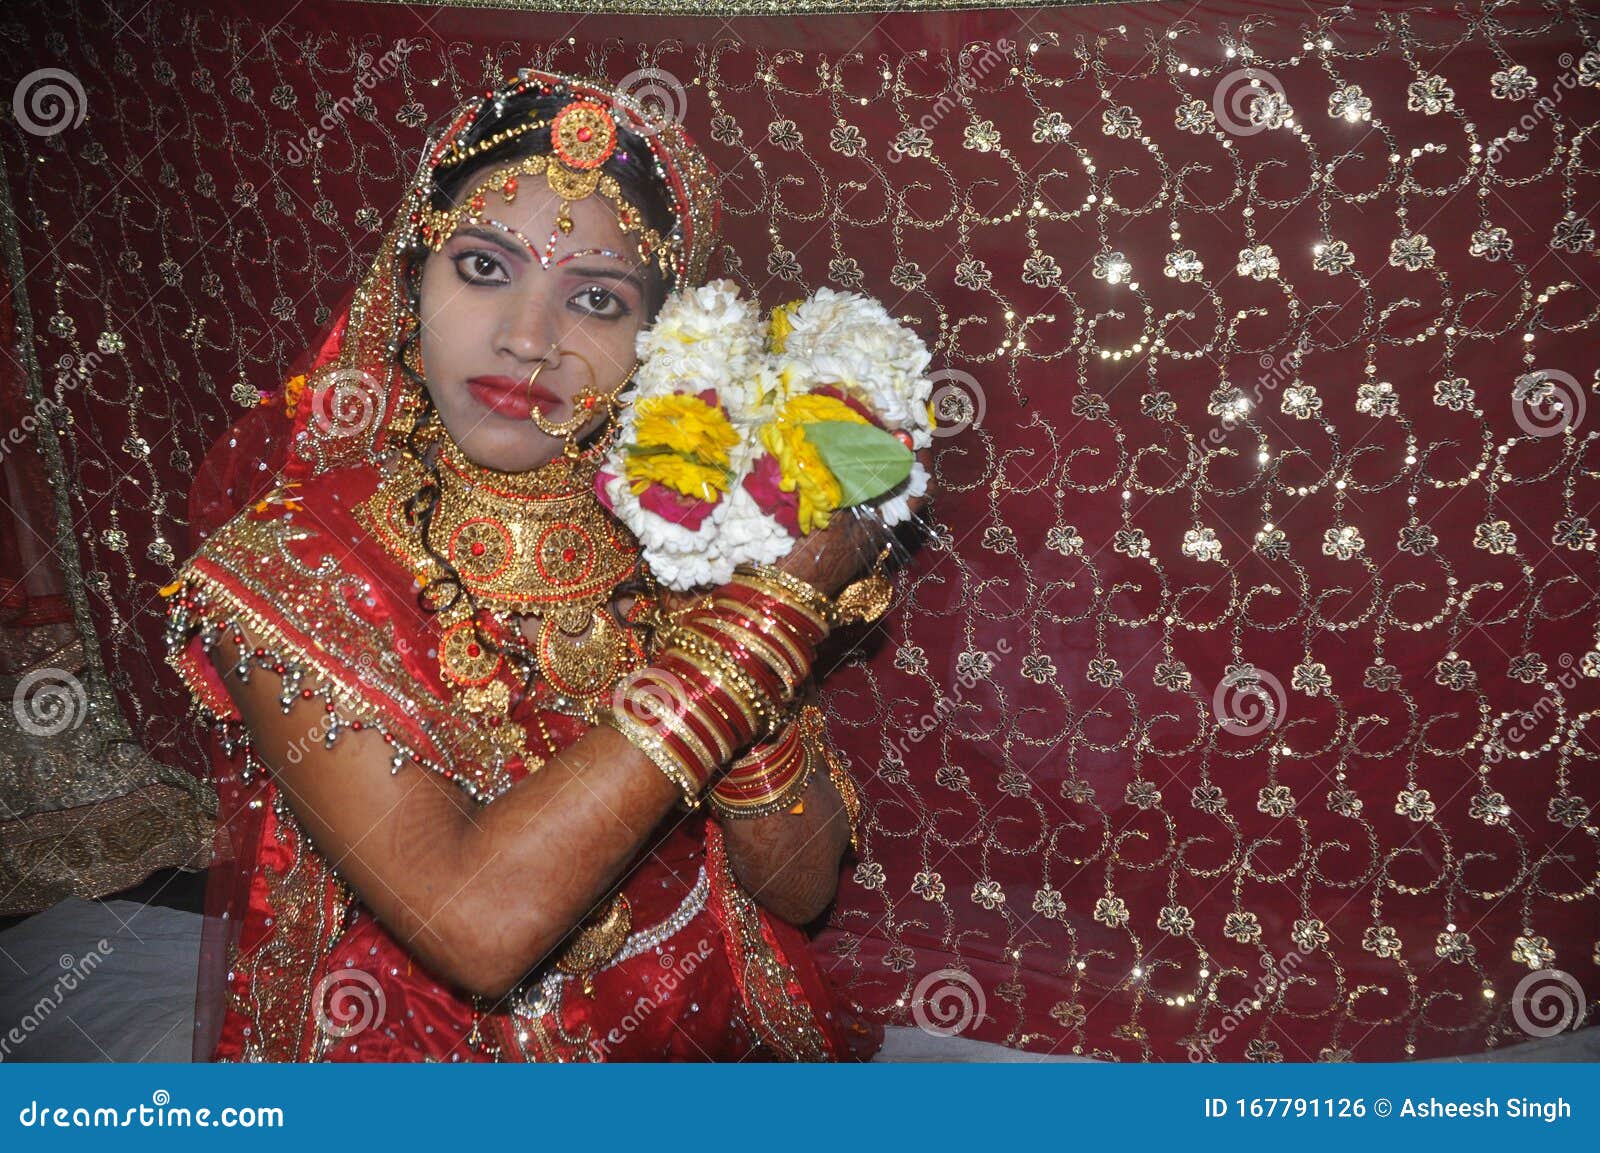 20+ Solo Poses For Indian Brides